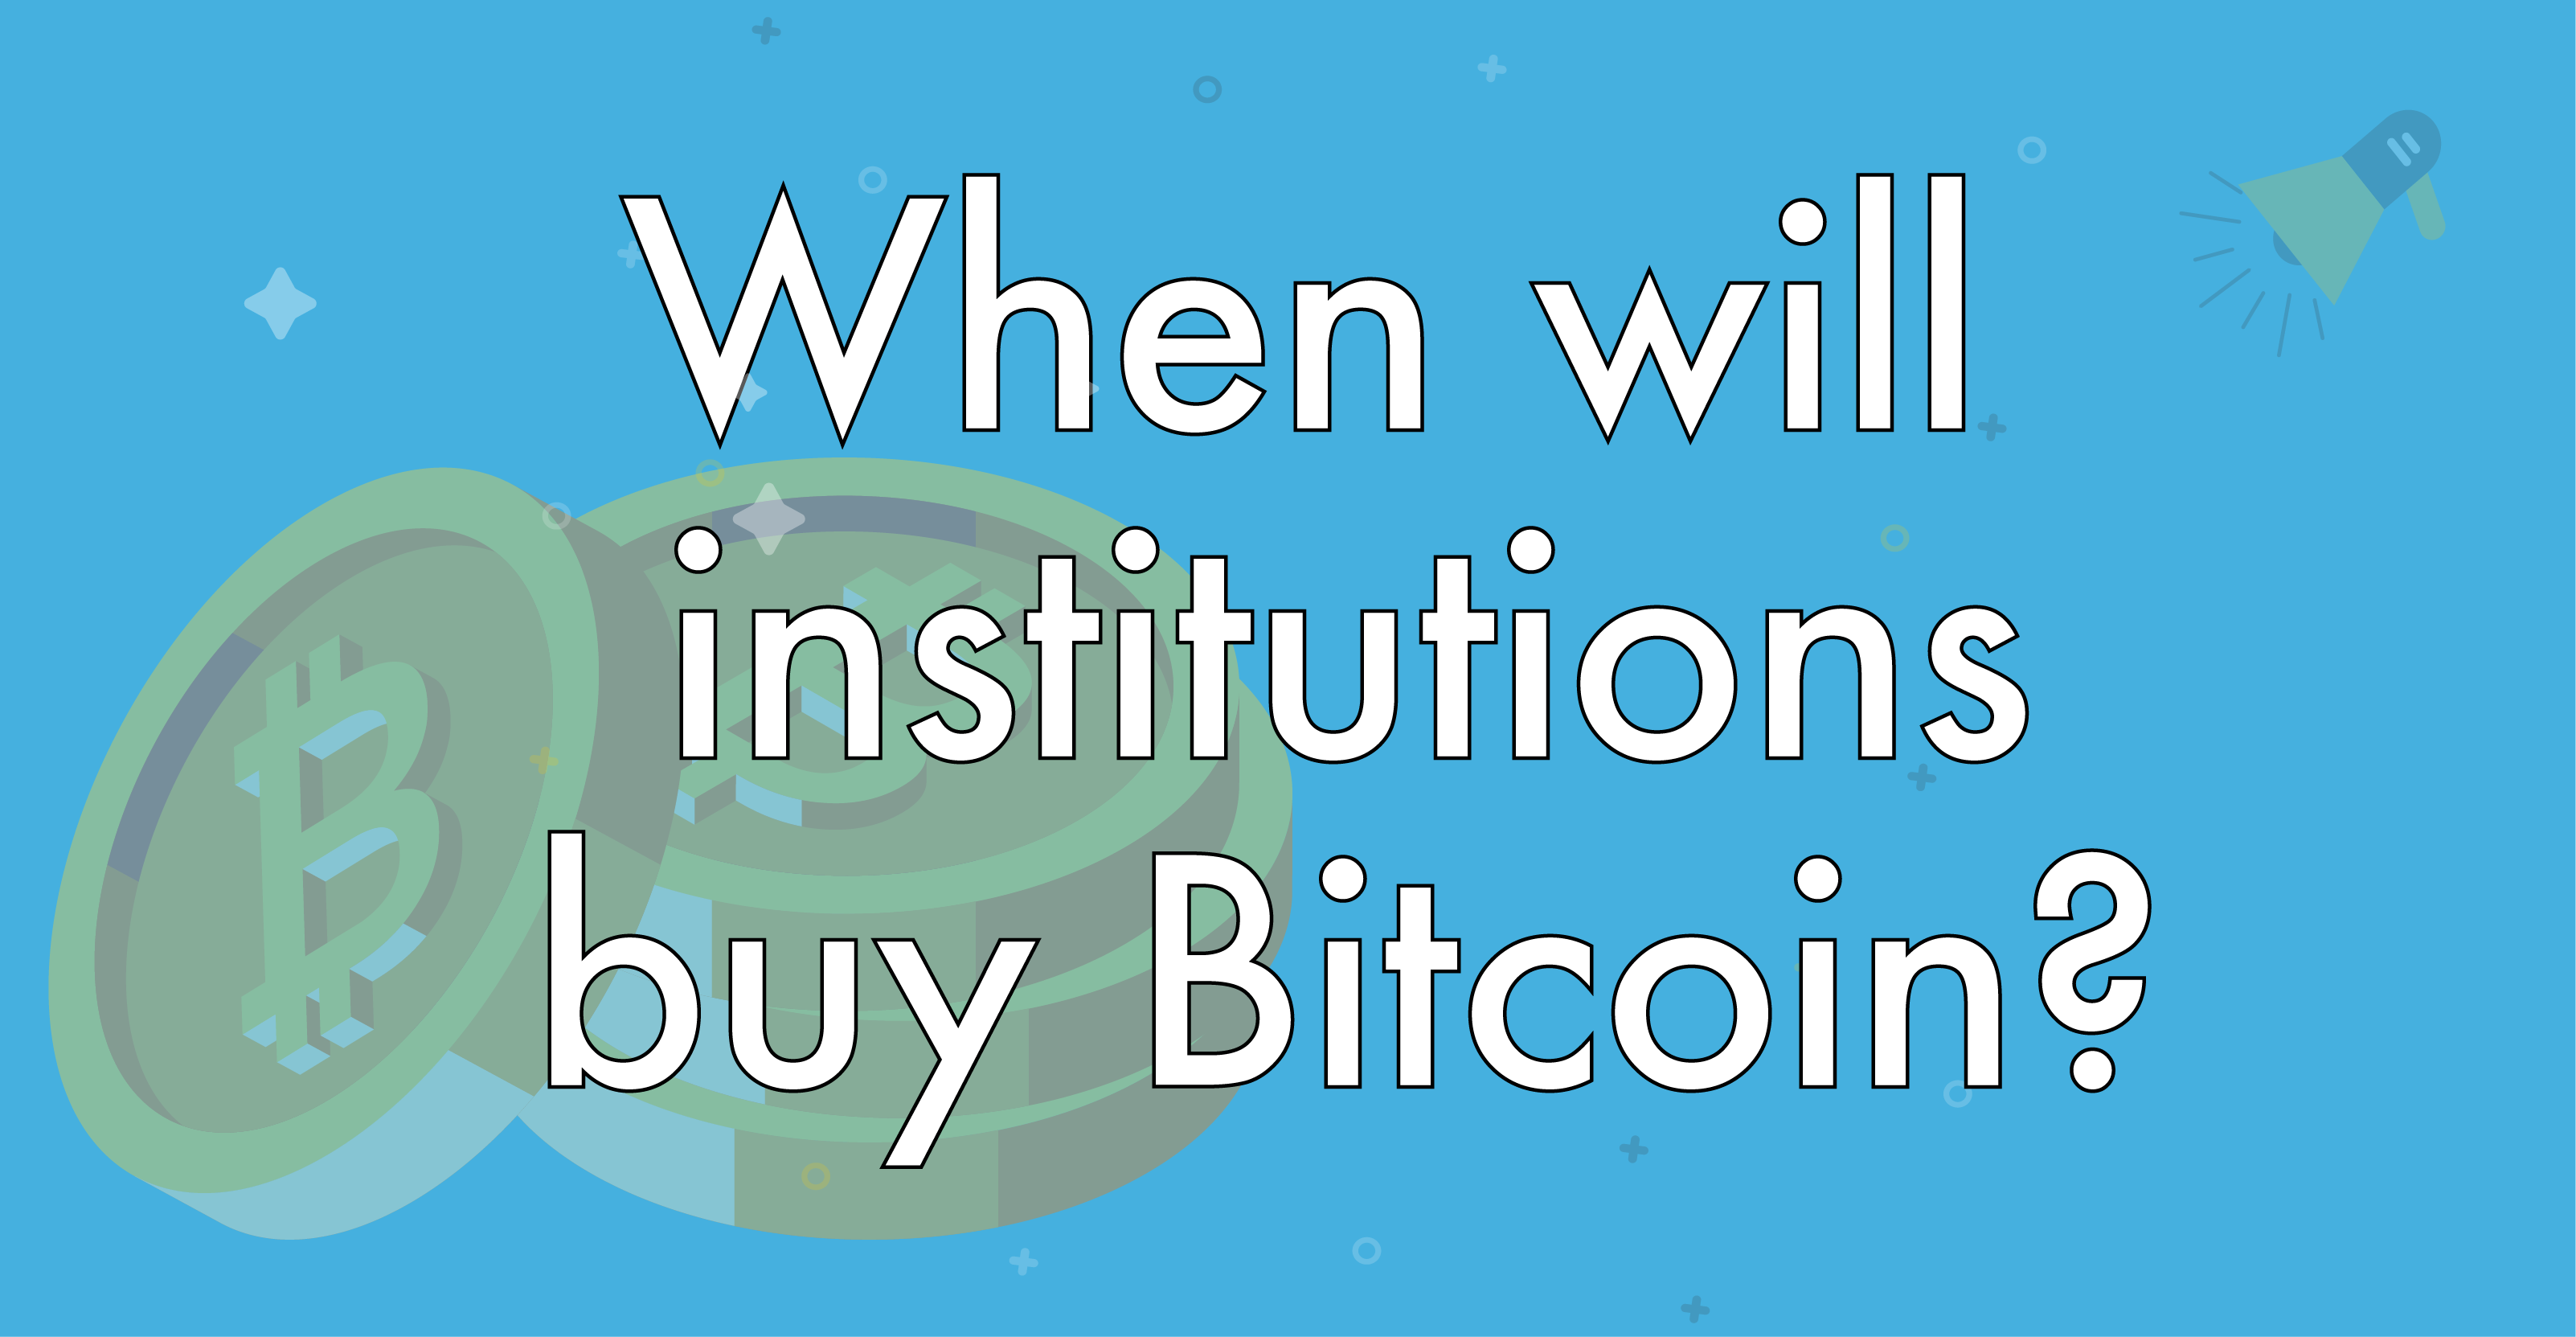 When Will Institutions Buy Bitcoin? Our Educated Guess